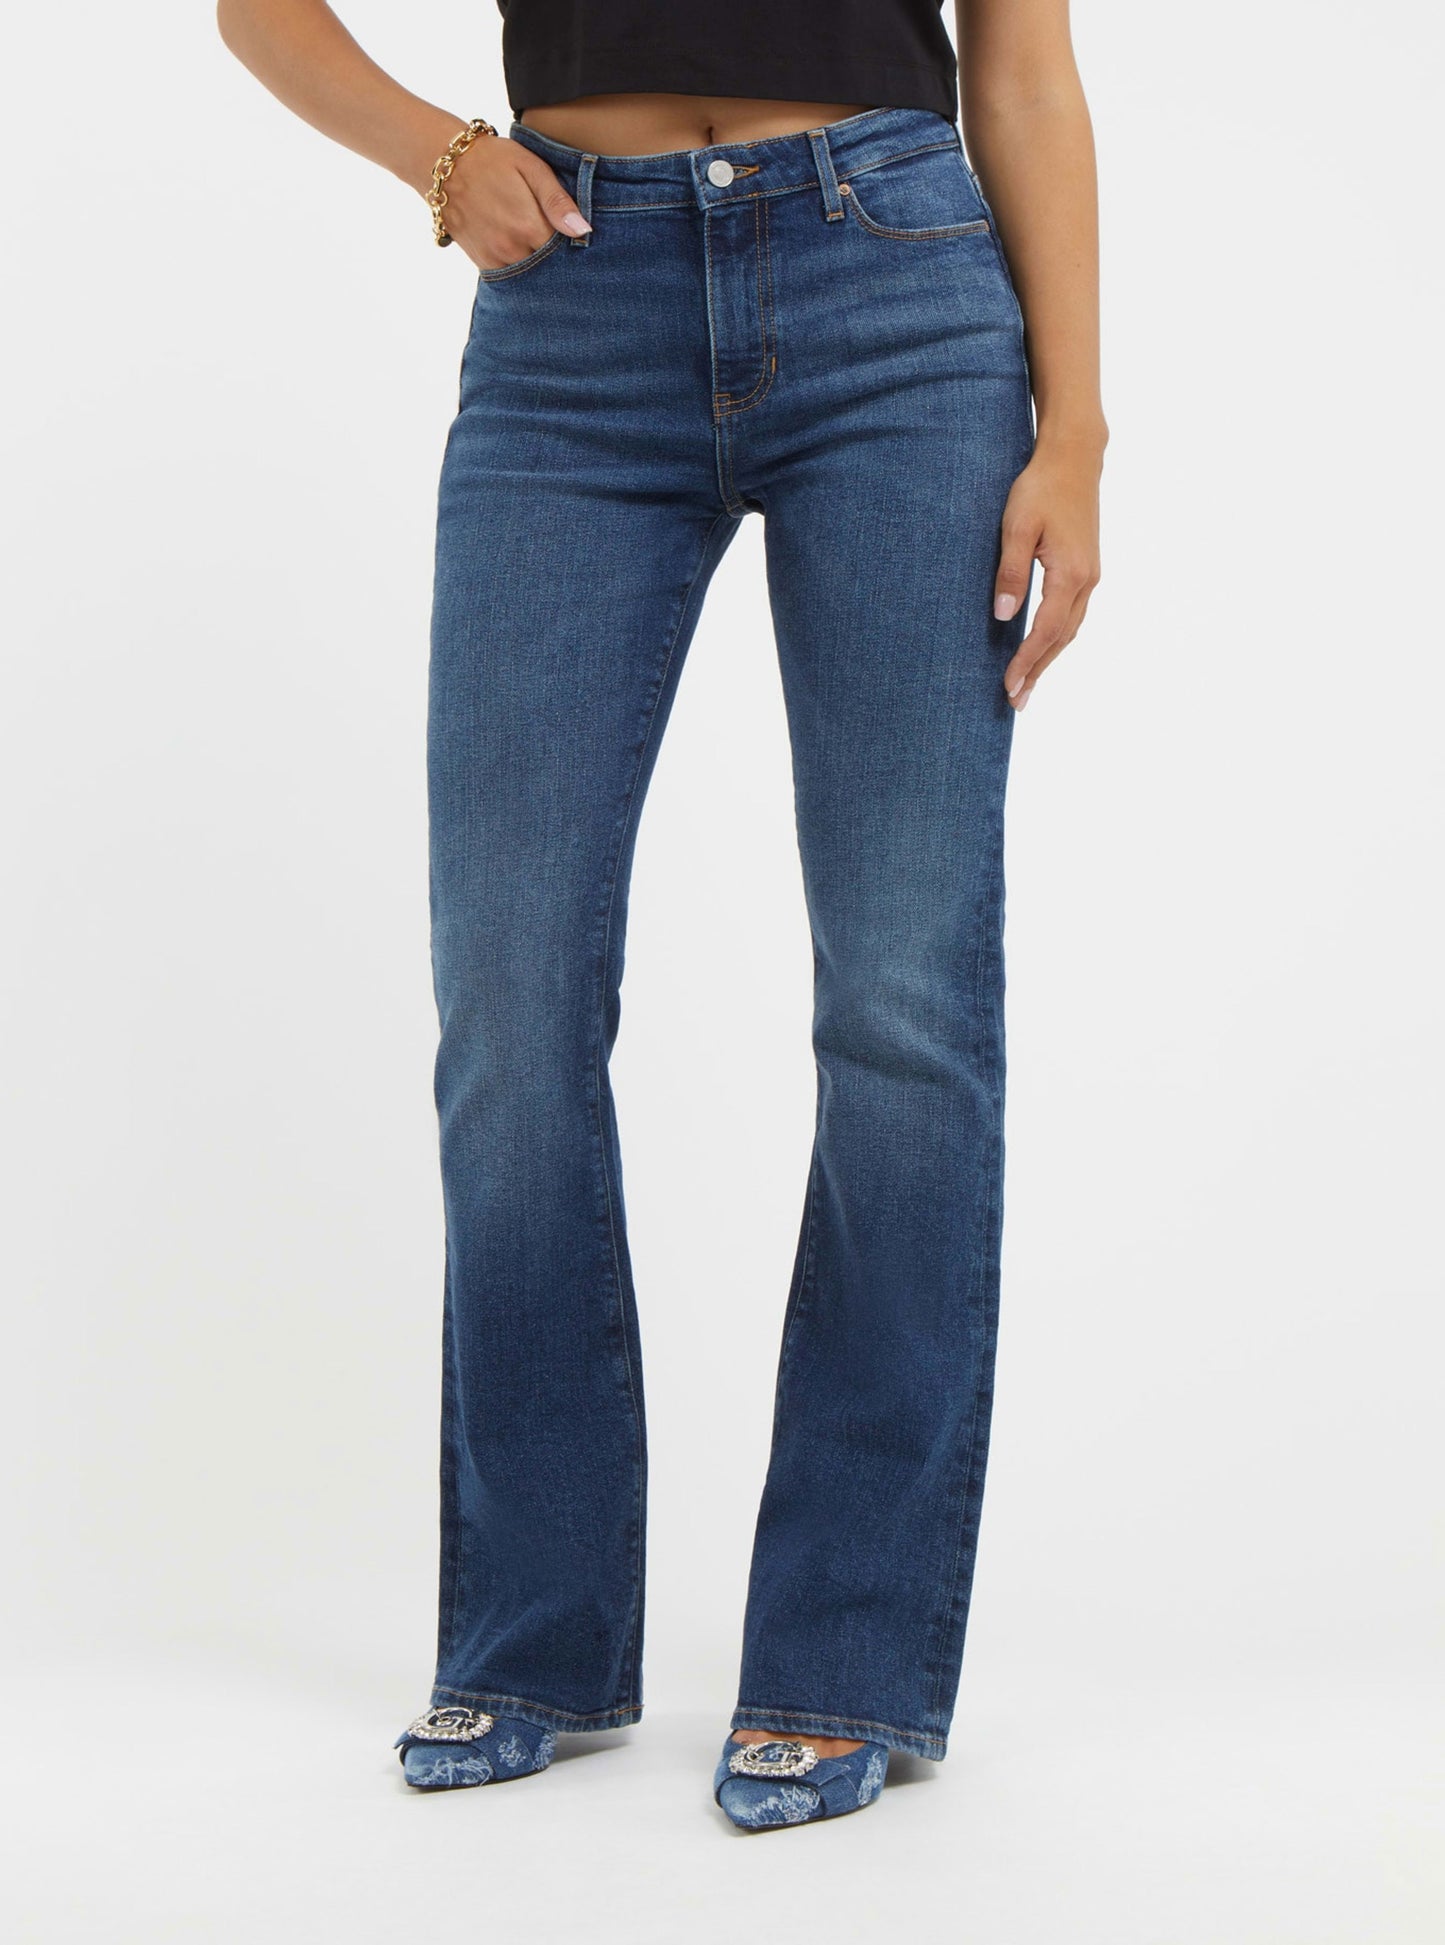 High-Rise Sexy Flare Leg Denim Jeans In Harrison Blue Wash | GUESS Women's Denim | front view